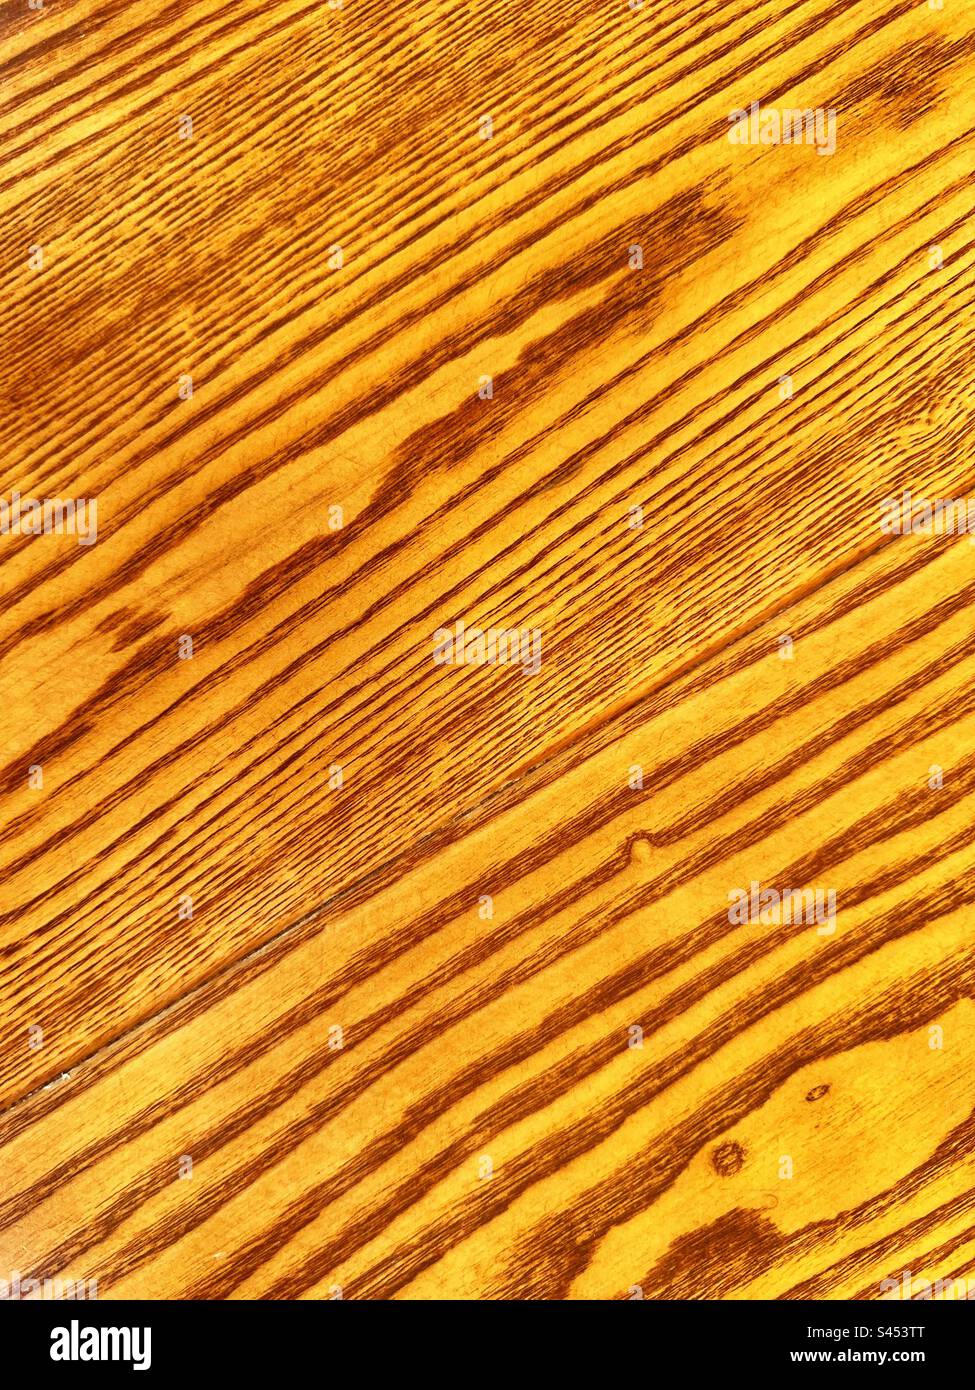 Close up view of the grain on a wooden table top. Backgrounds. No people. Stock Photo